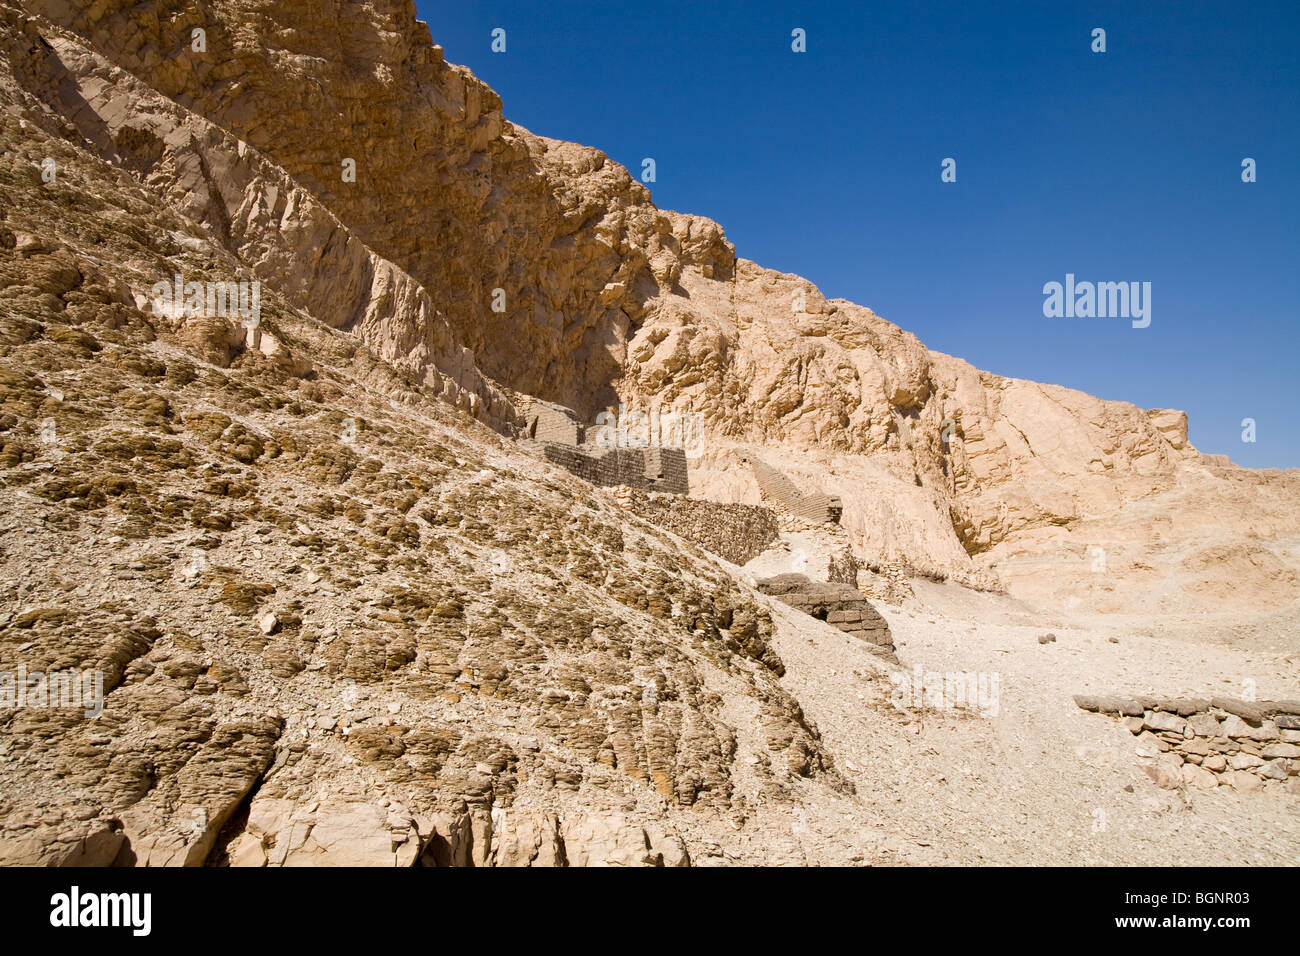 View of Theban Hills above Deir el-Medina, worker's village near Valley of The Kings, West Bank of Nile, Luxor, Egypt Stock Photo